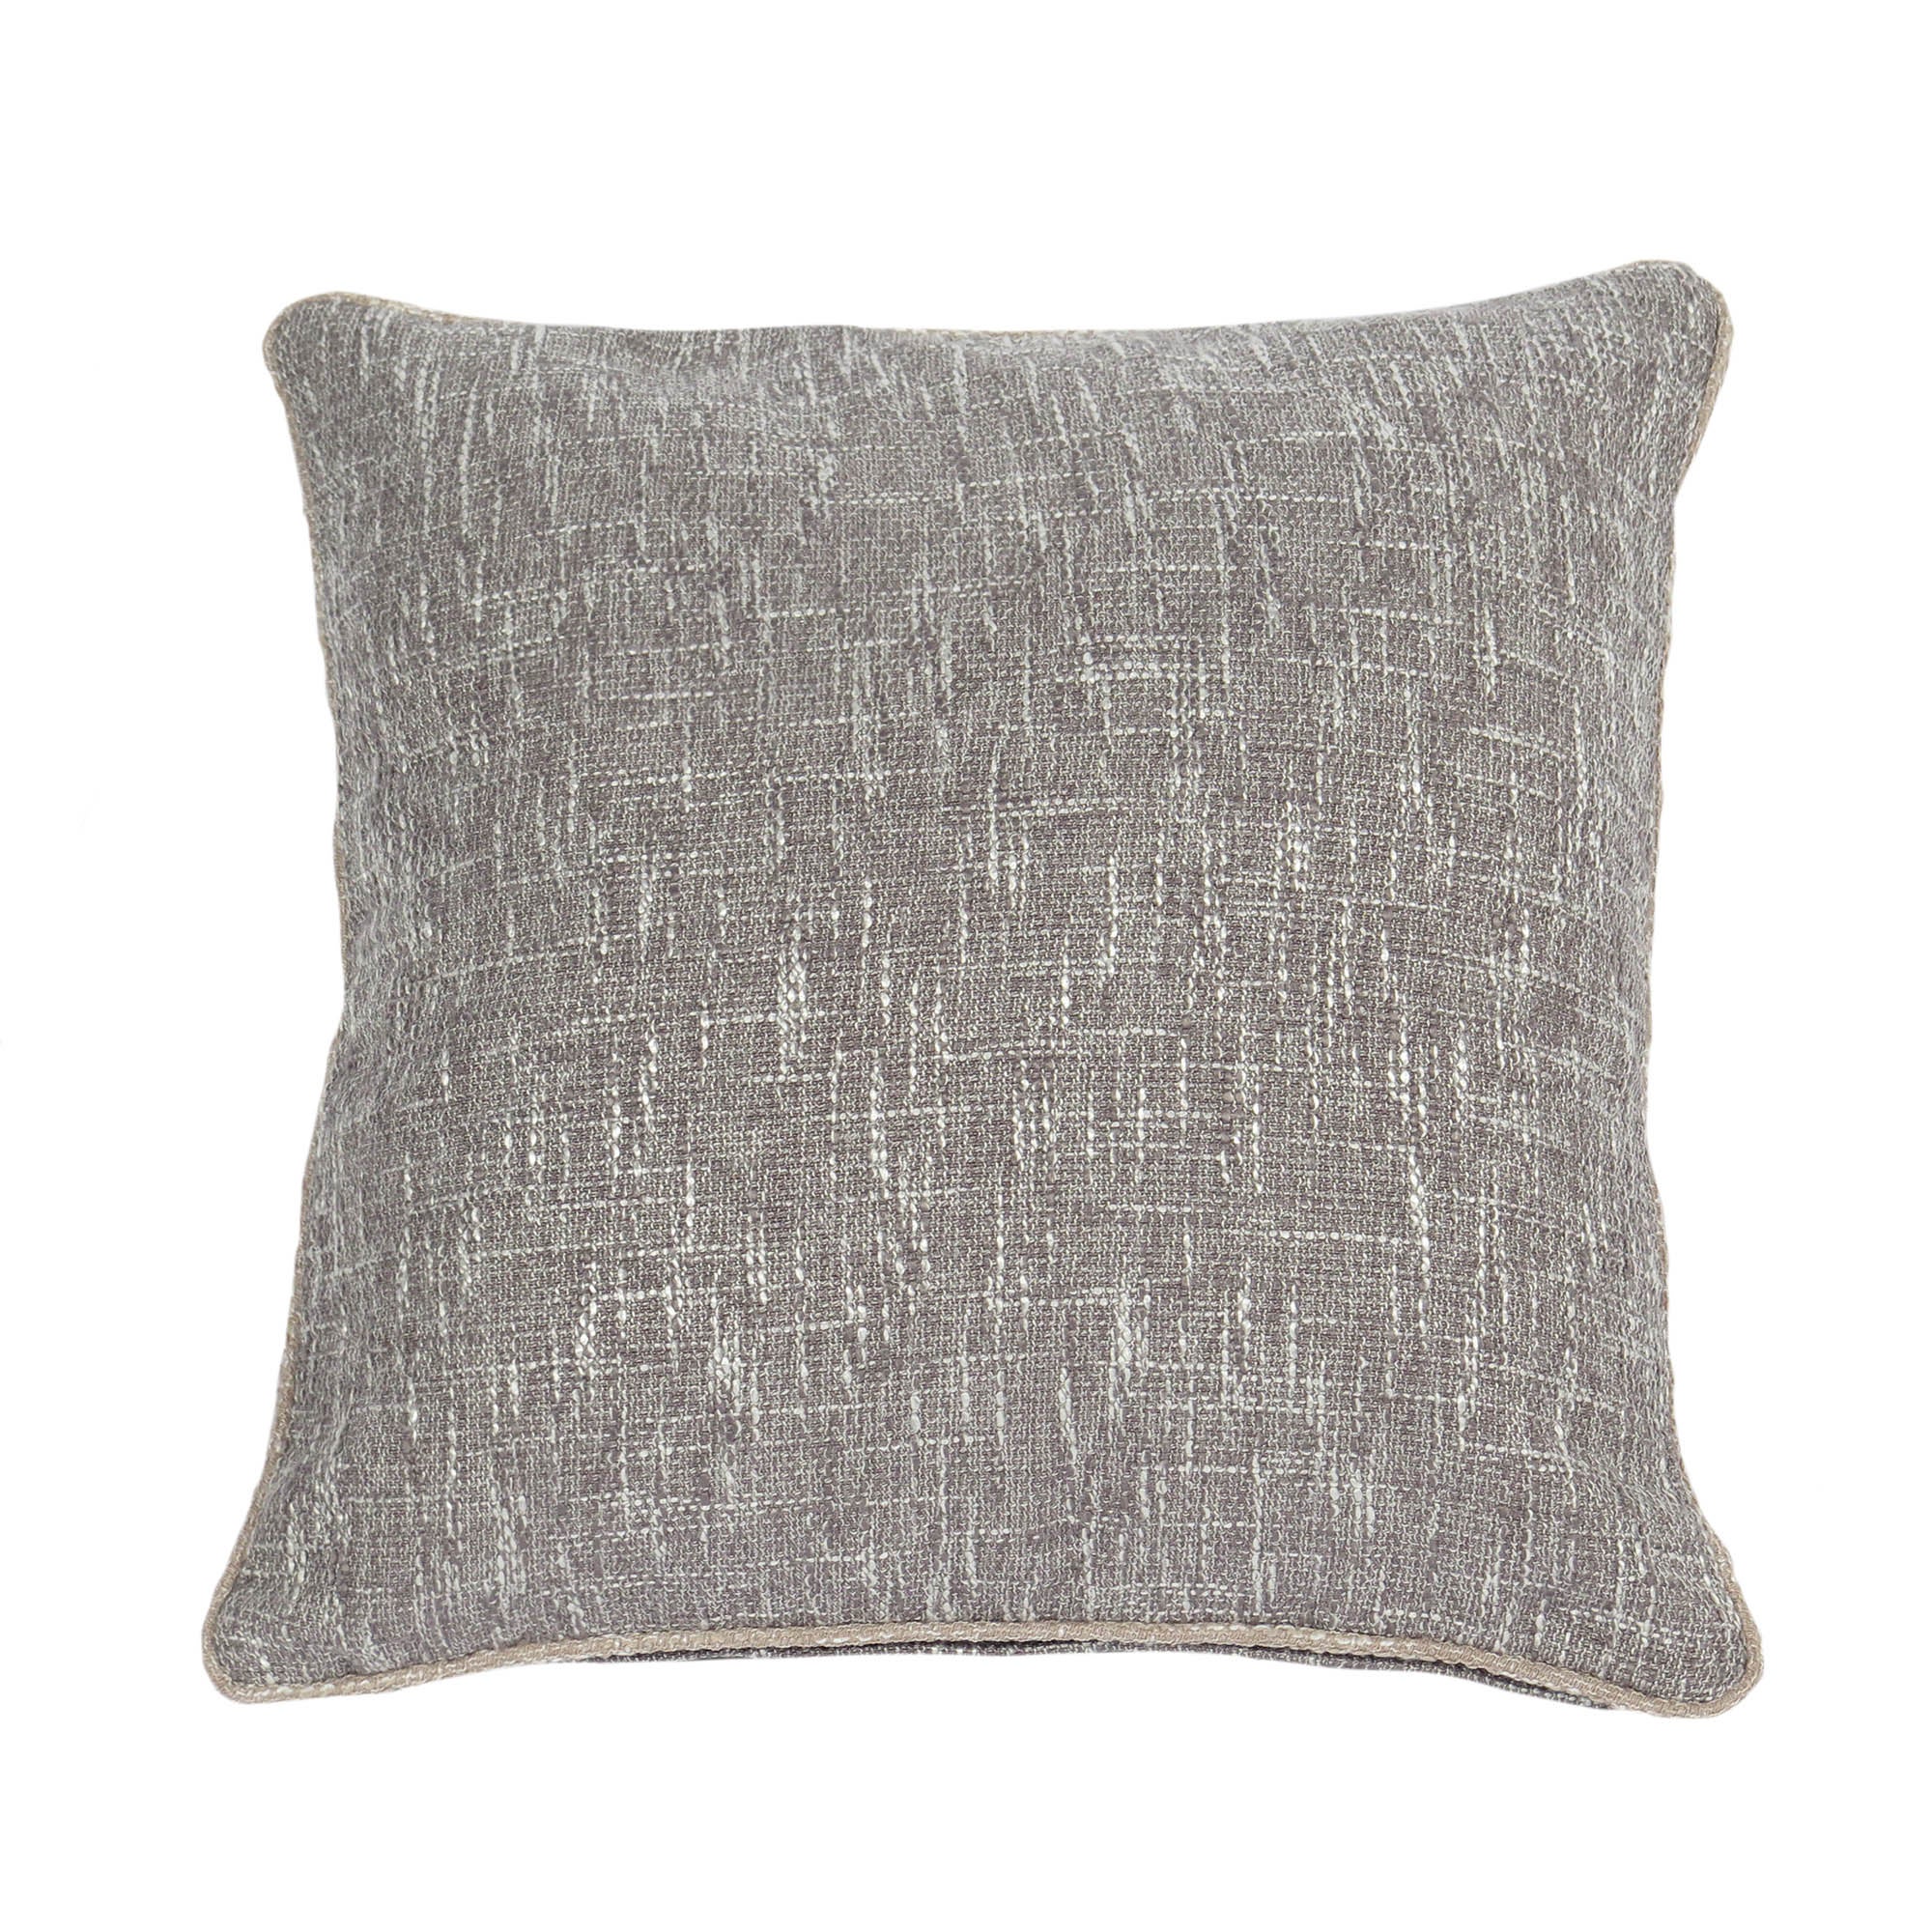 Filled Cushions | Small & Large Filled Cushions | Dunelm